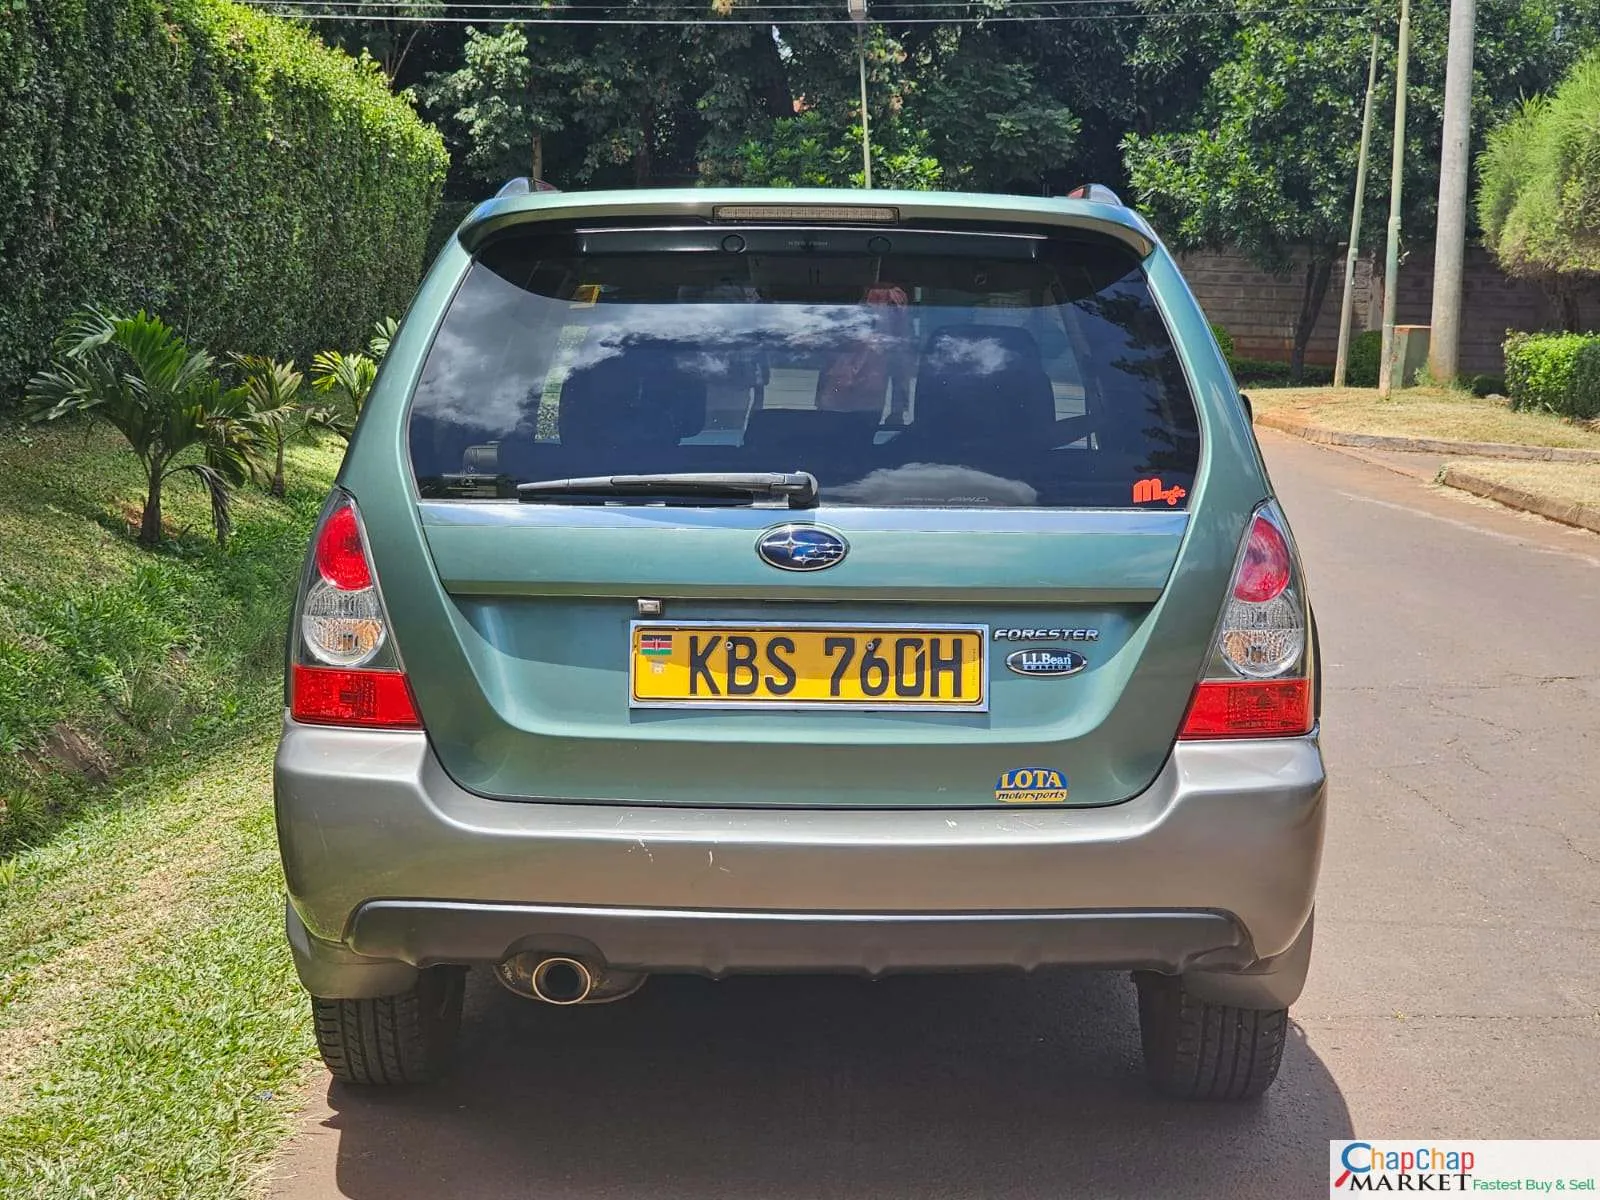 Subaru Forester for sale in Kenya You Pay 30% deposit Trade in Ok EXCLUSIVE hire purchase installments non turbo sg5